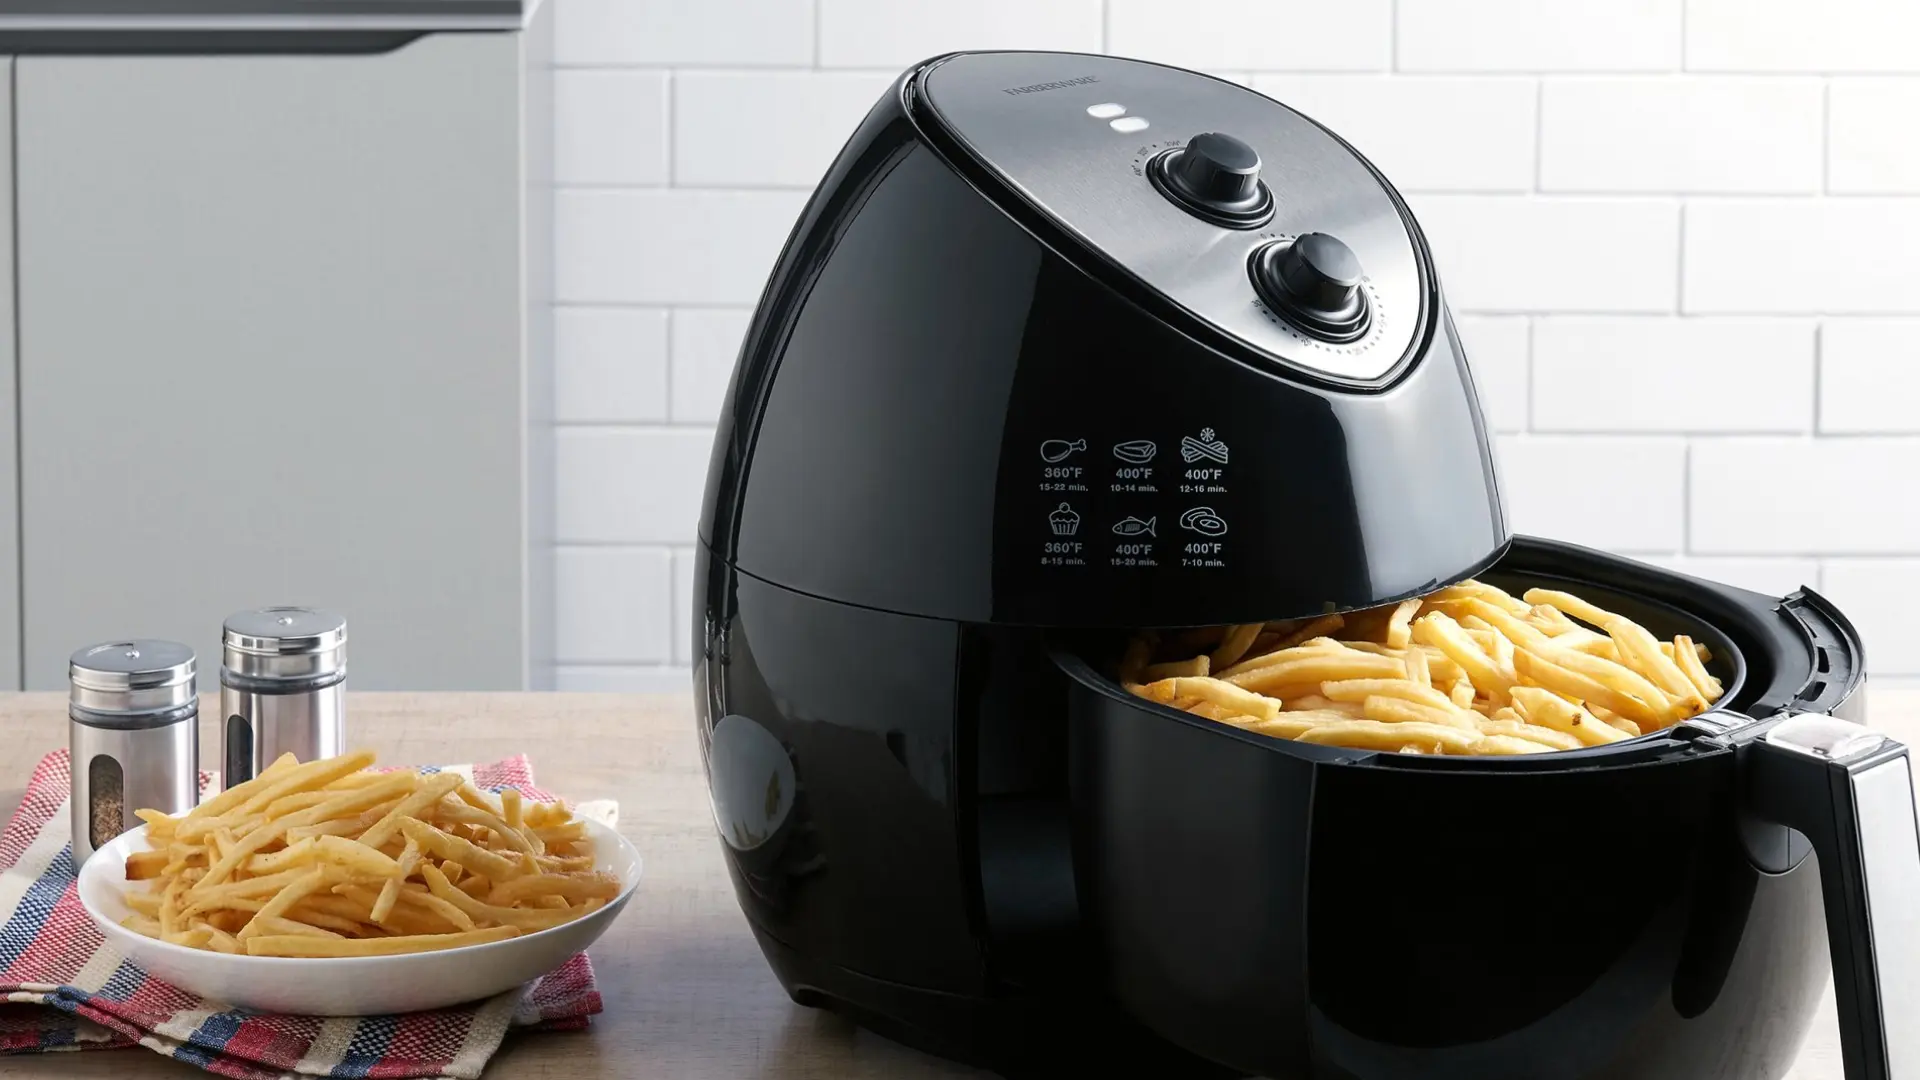 Capacity What Can You Cook in This Air Fryer